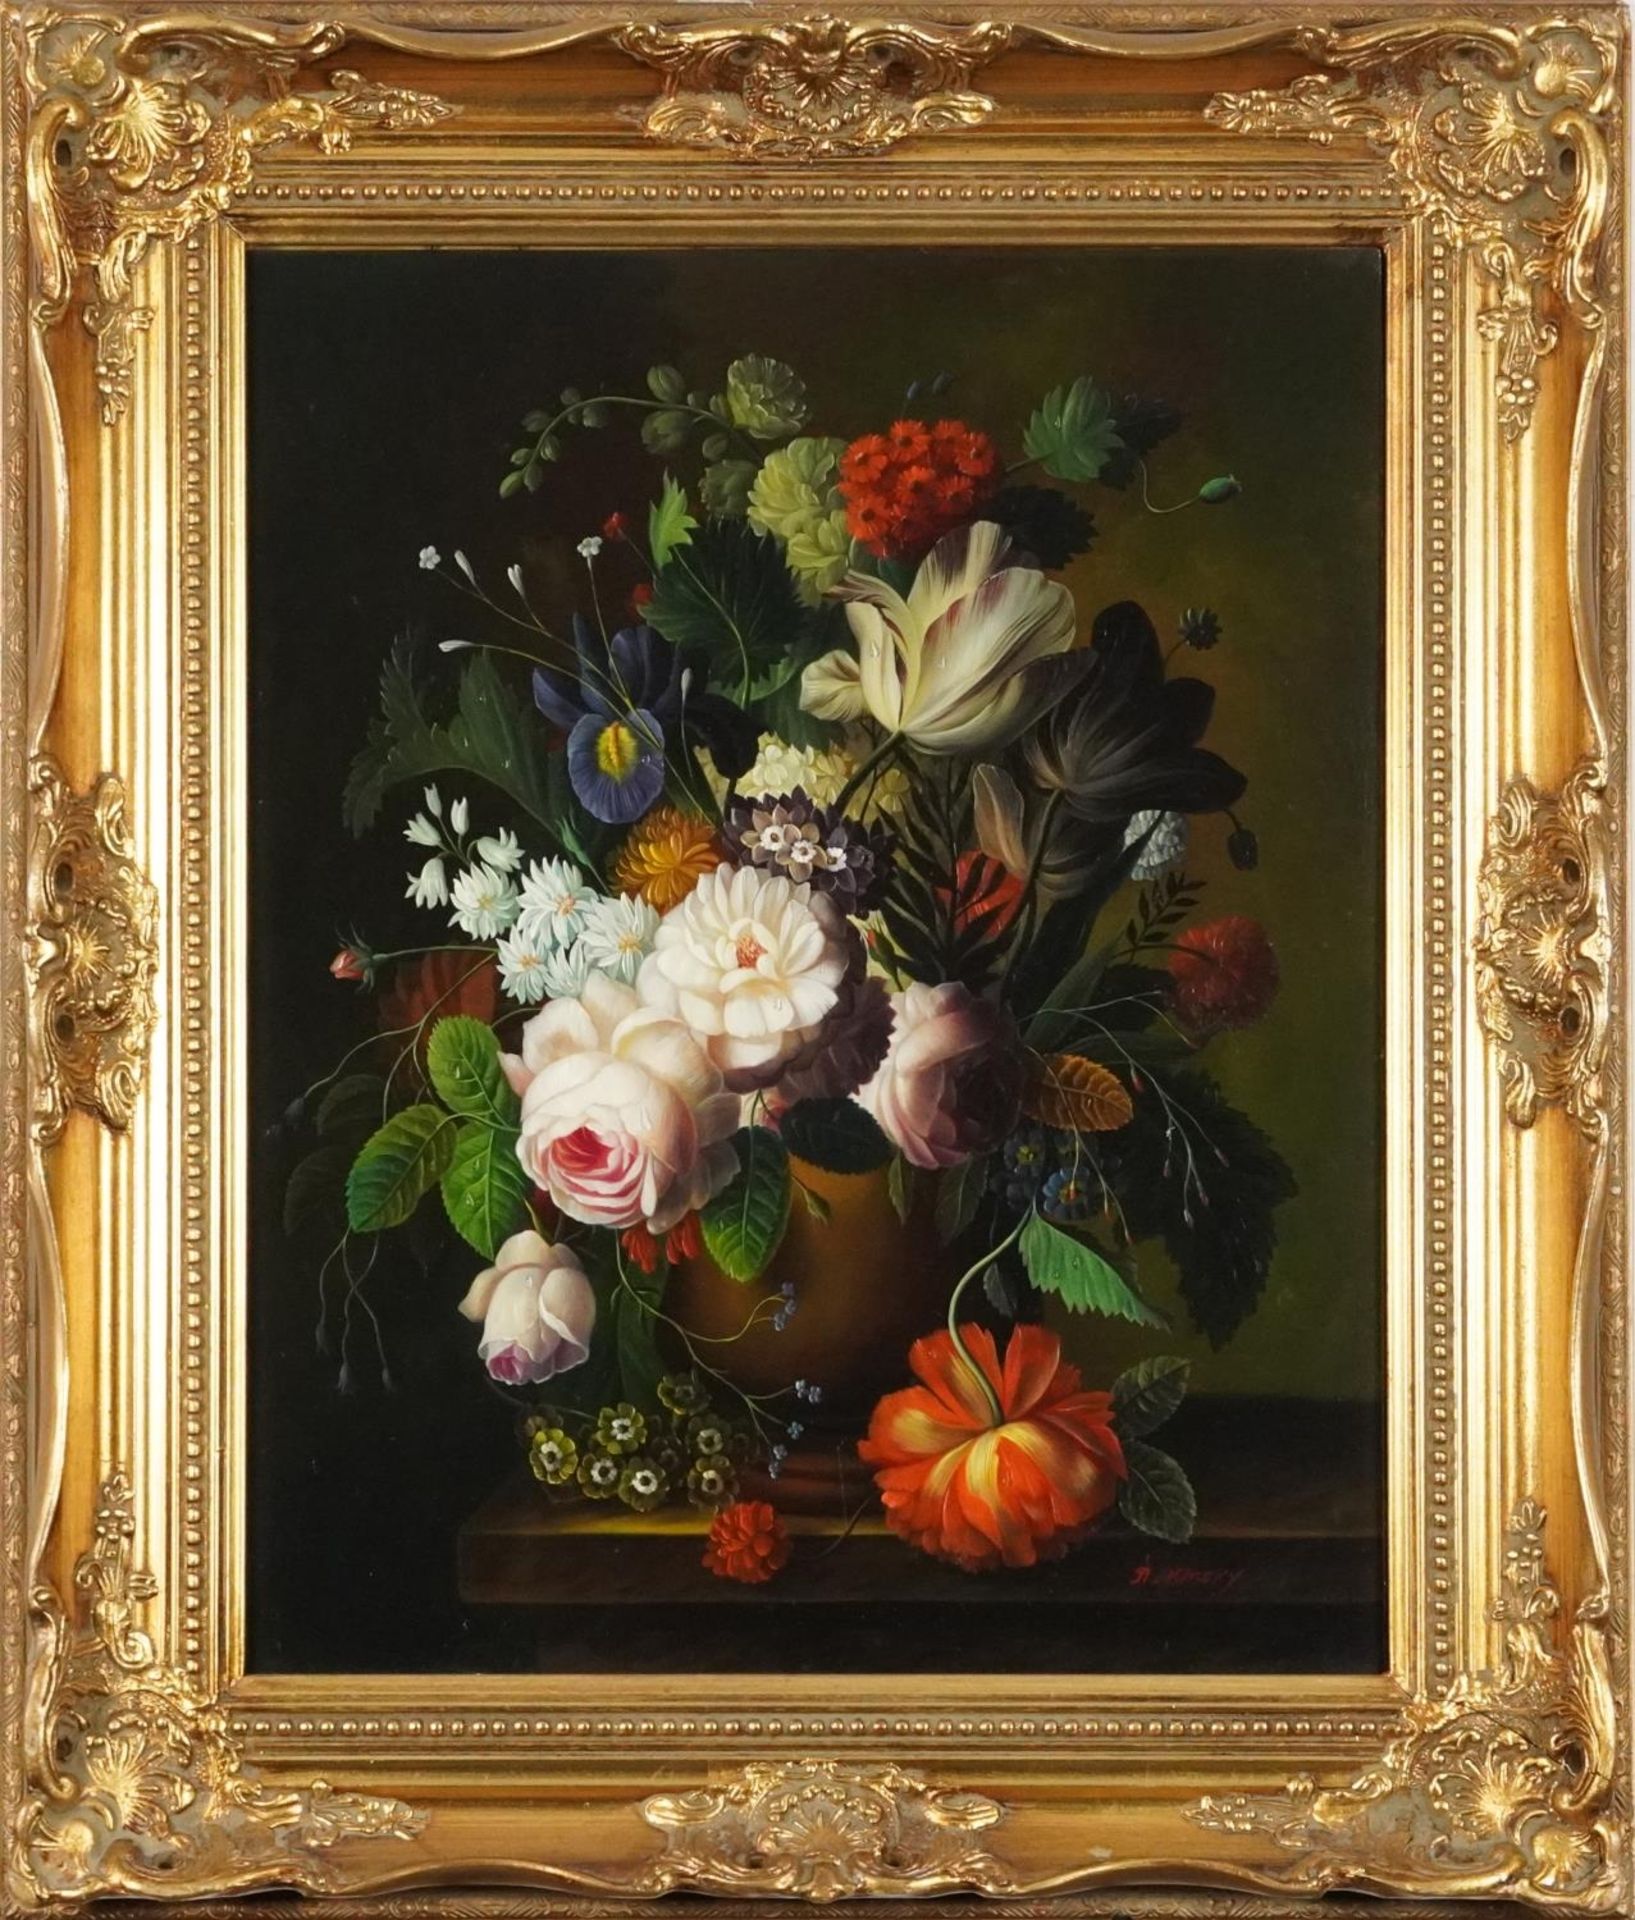 N Kinsky - Still life flowers in a vase, Old Master style oil on wood panel, mounted and framed, - Bild 2 aus 6